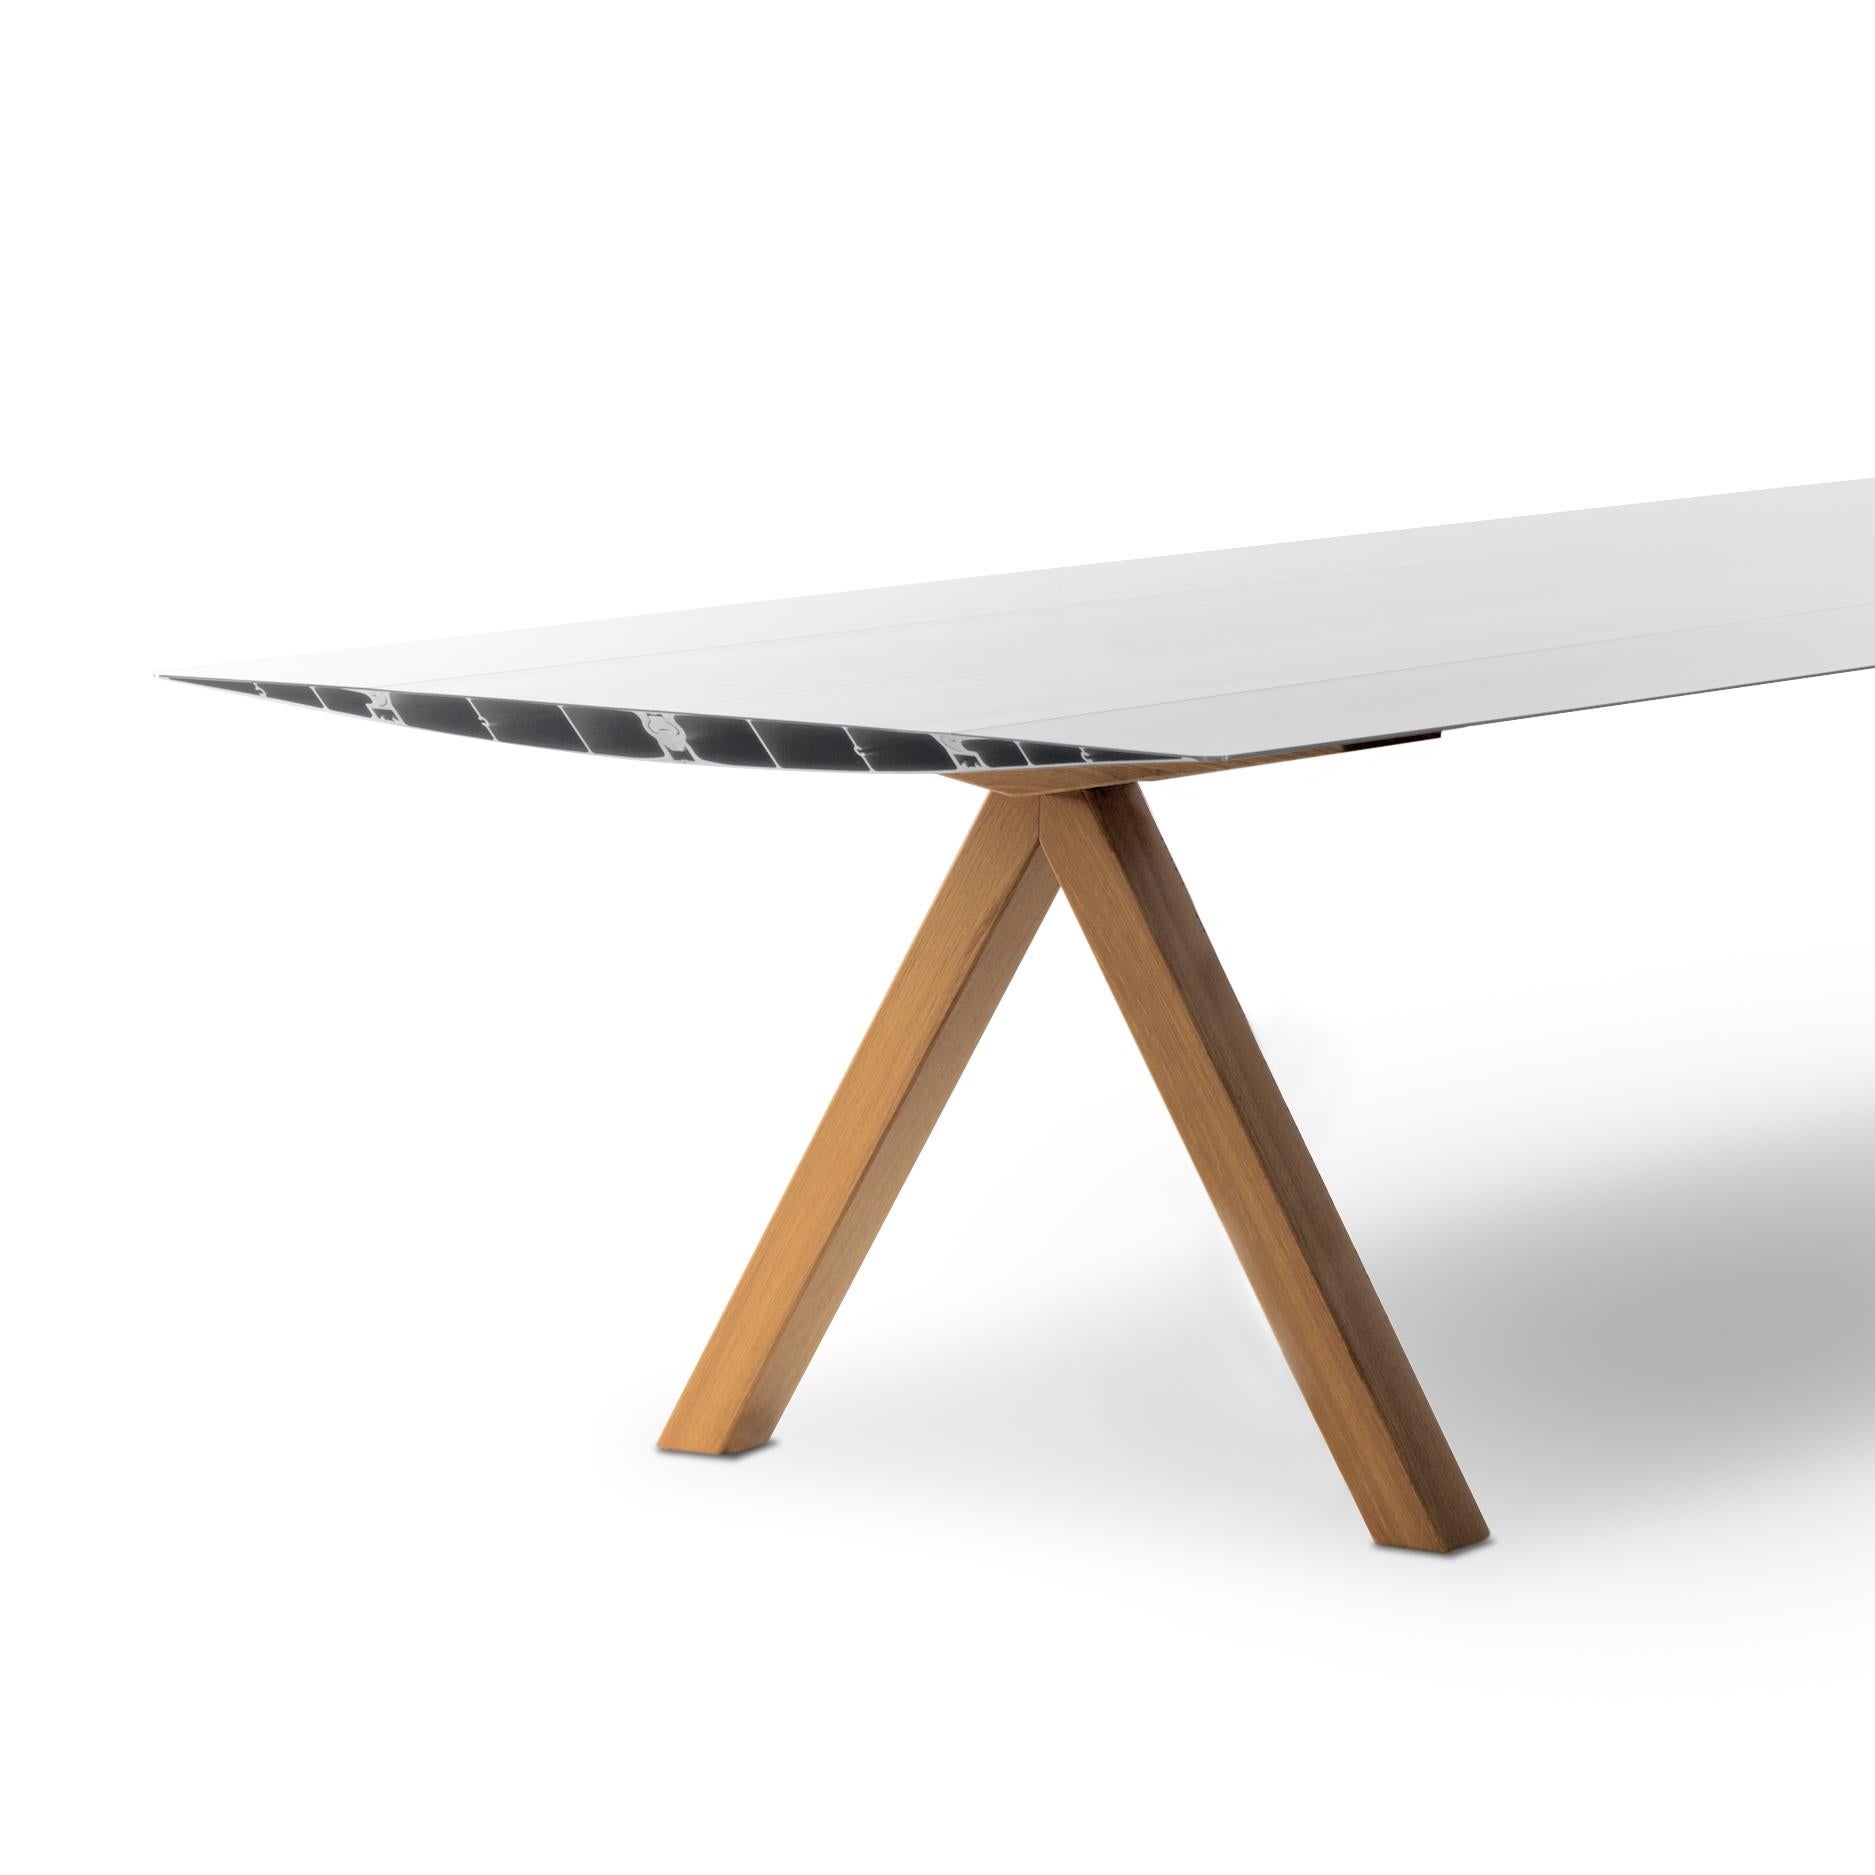 Table designed by Konstantin Grcic designed in 2009 manufactured by BD Barcelona.

The Table B, which inaugurated the Extrusions Collection in 2009, can reach up to five metres using a simple profile of extruded aluminium. Its apparent simplicity